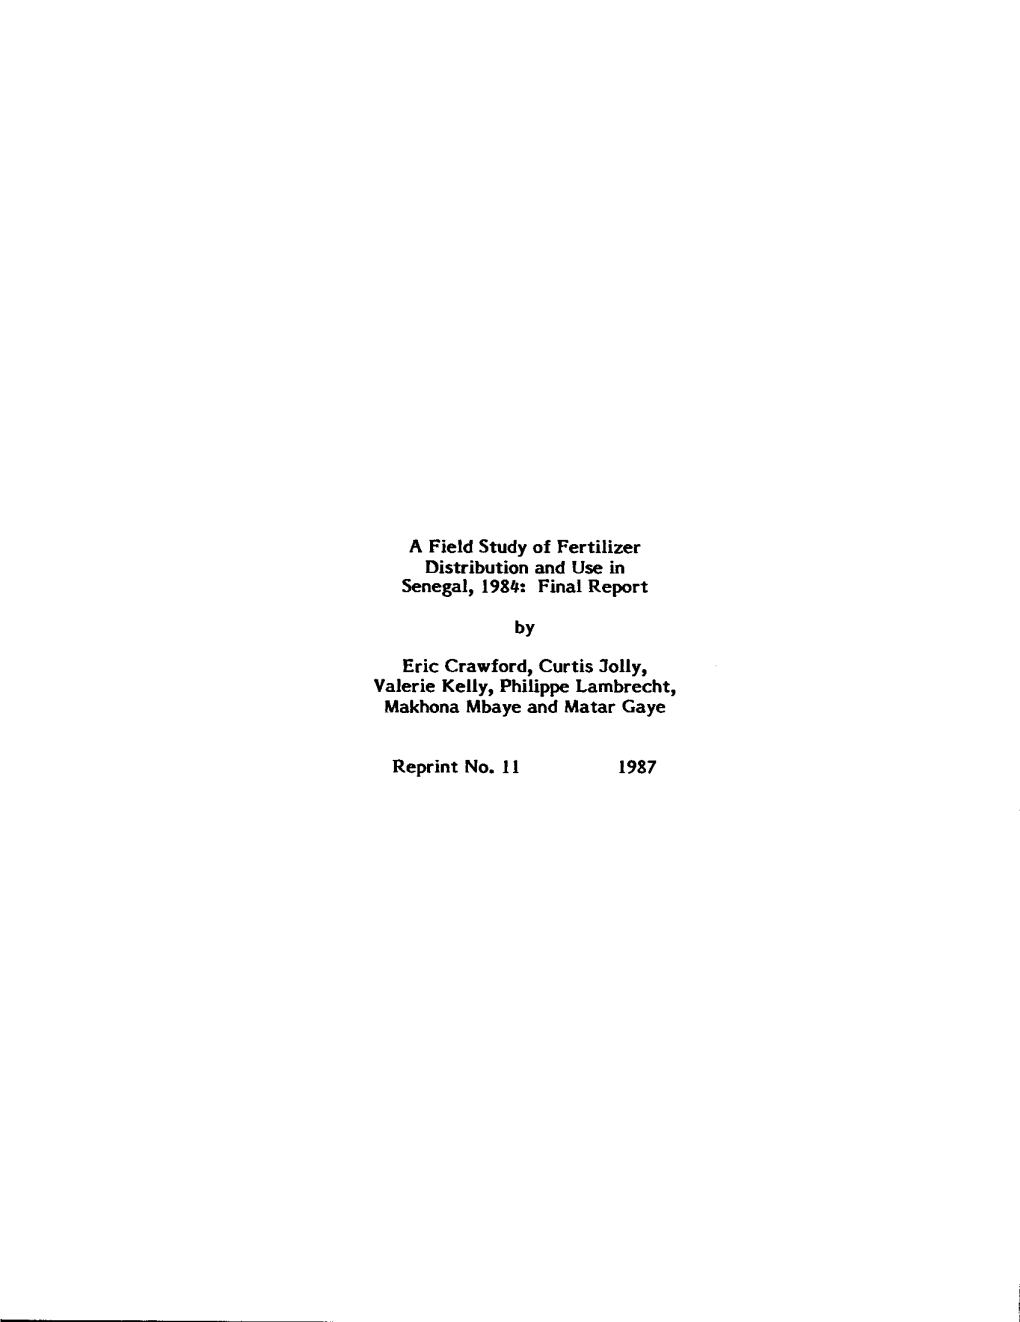 A Field Study of Fertilizer Distribution and Use in Senegal, 1984: Final Report